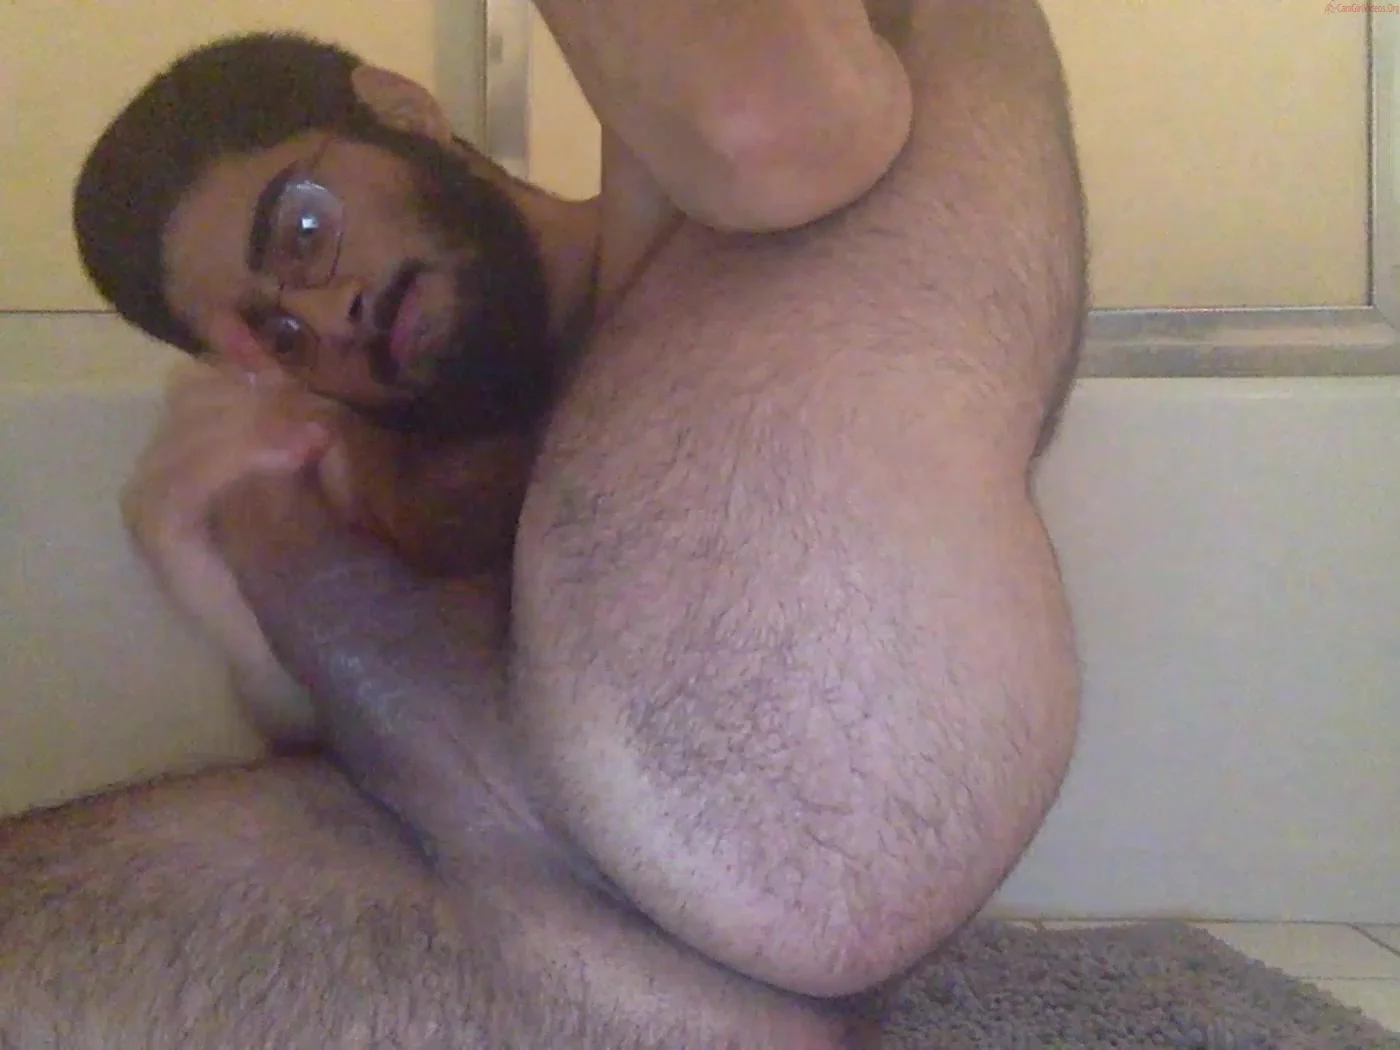 1400px x 1050px - Arab hot: Hairy arab in an intense session withâ€¦ ThisVid.com